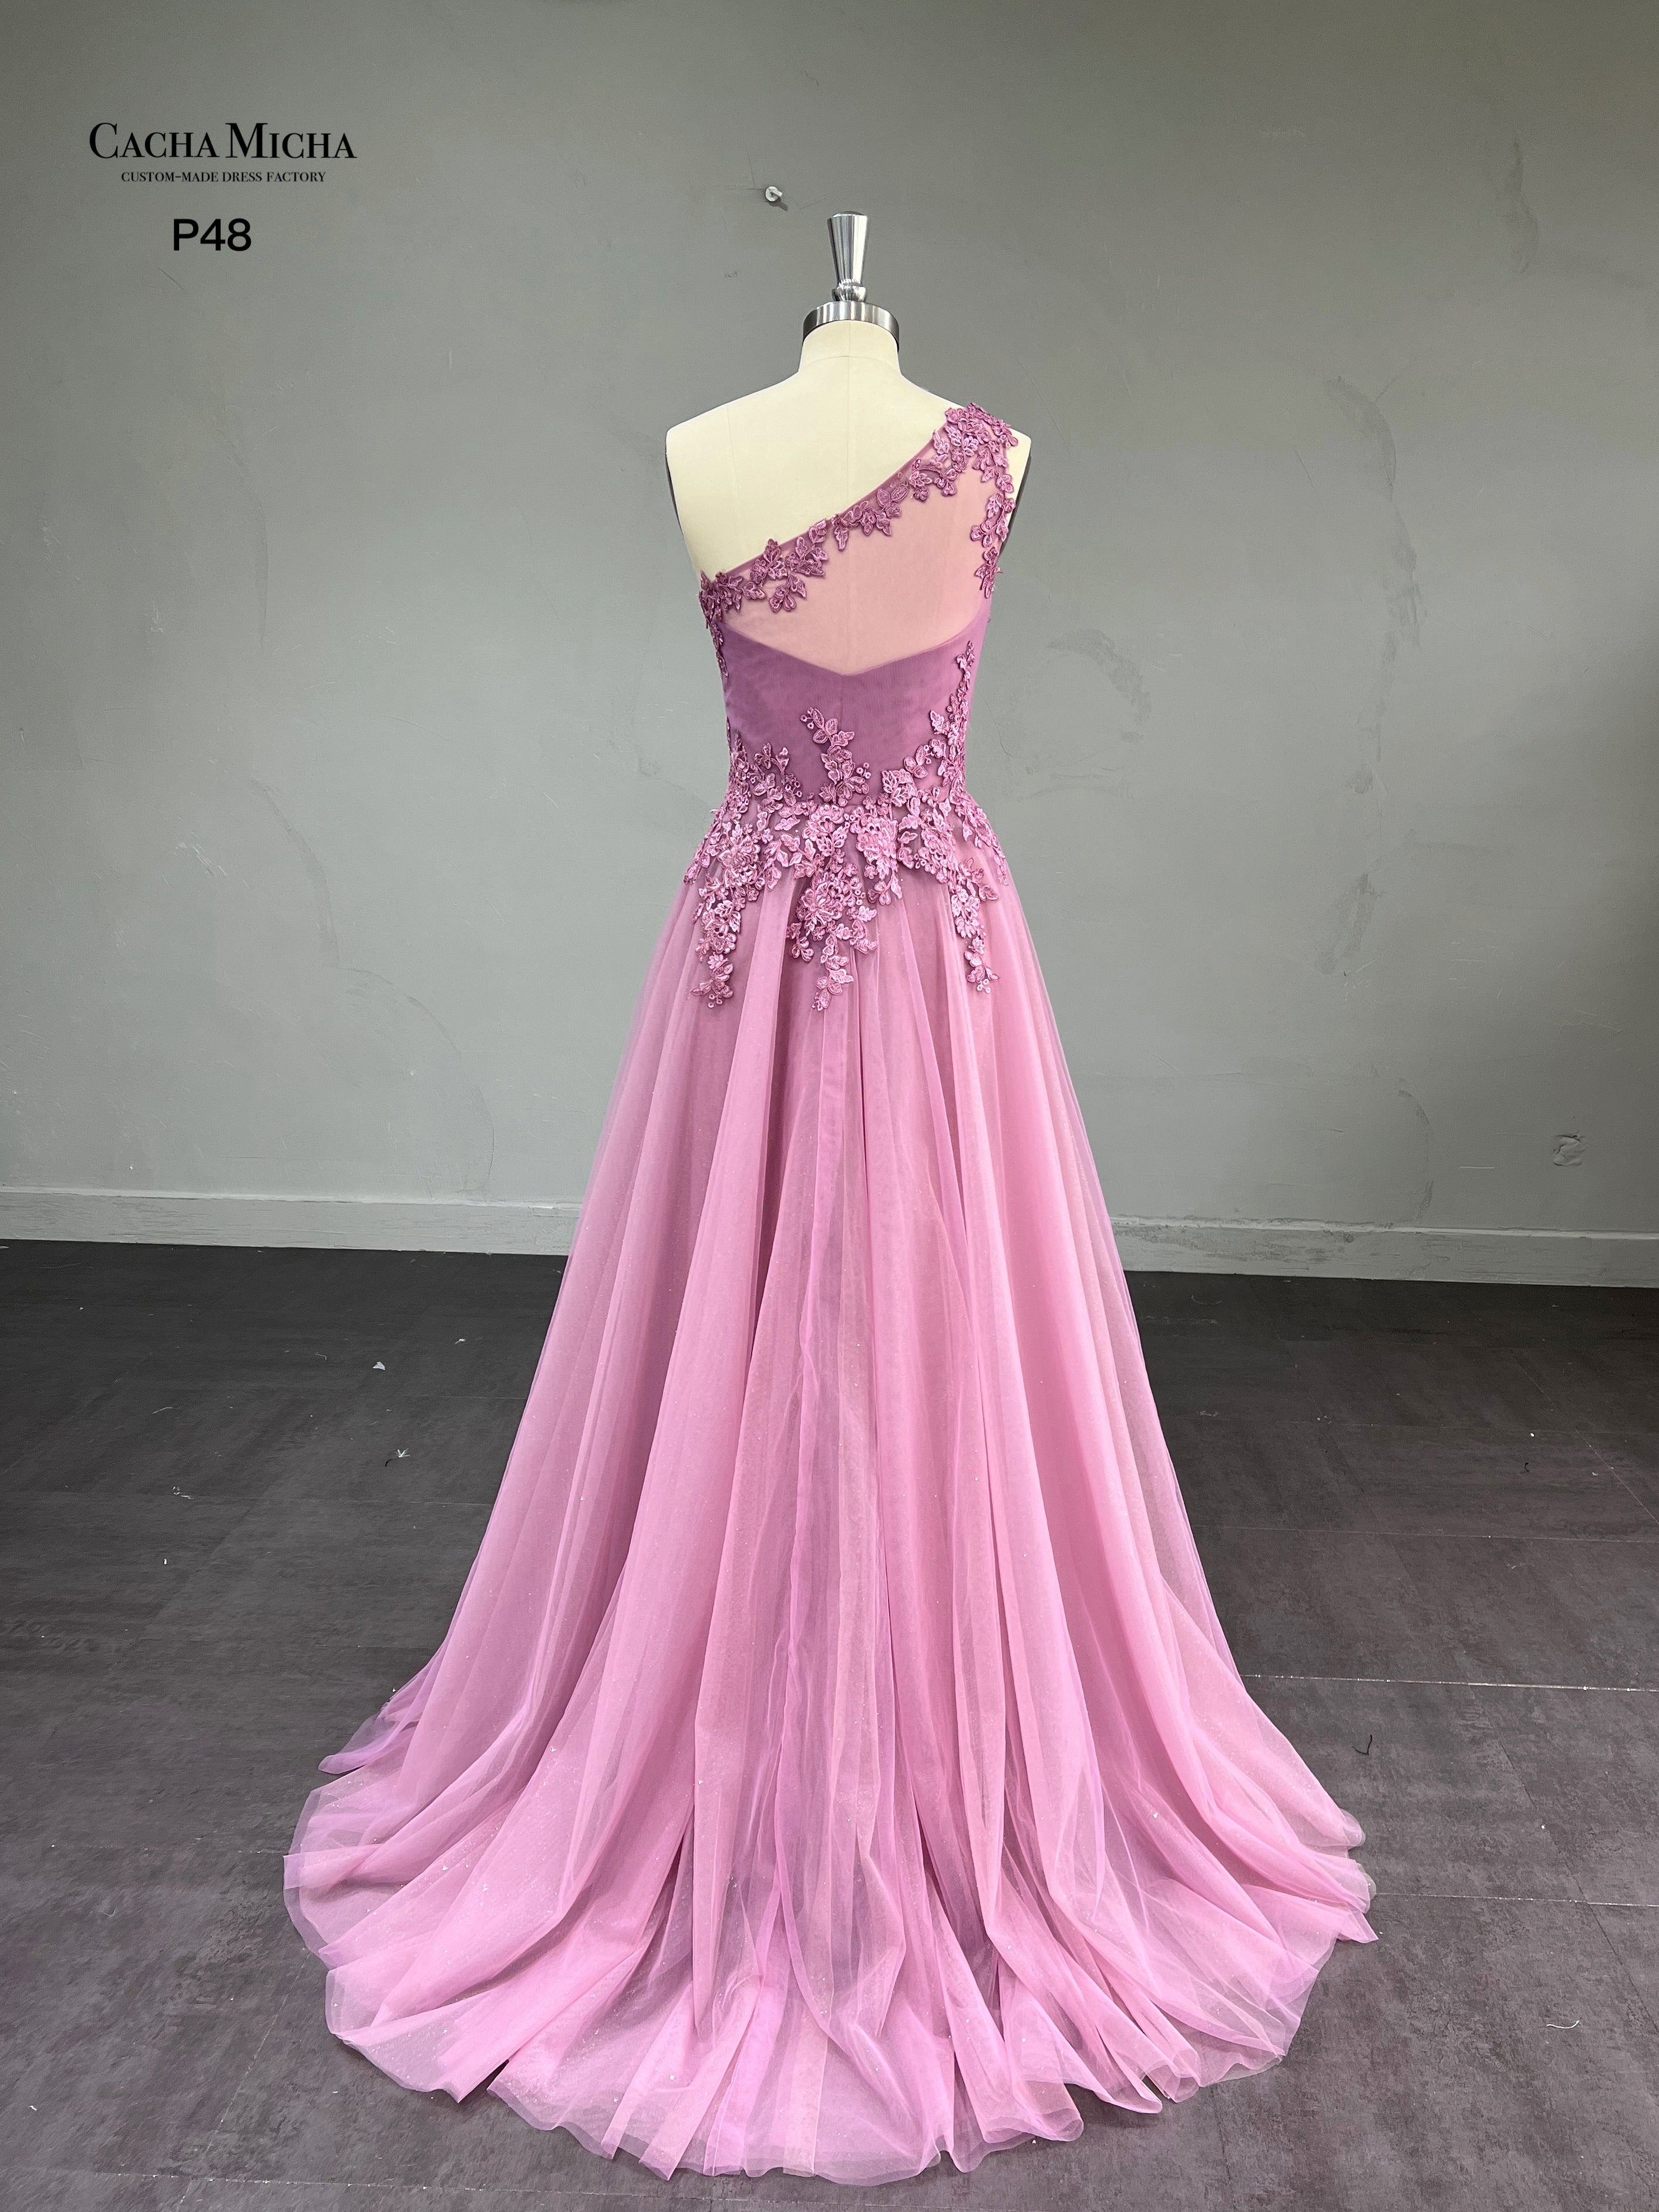 One Shoulder Pink Lace A Line Prom Dress P48